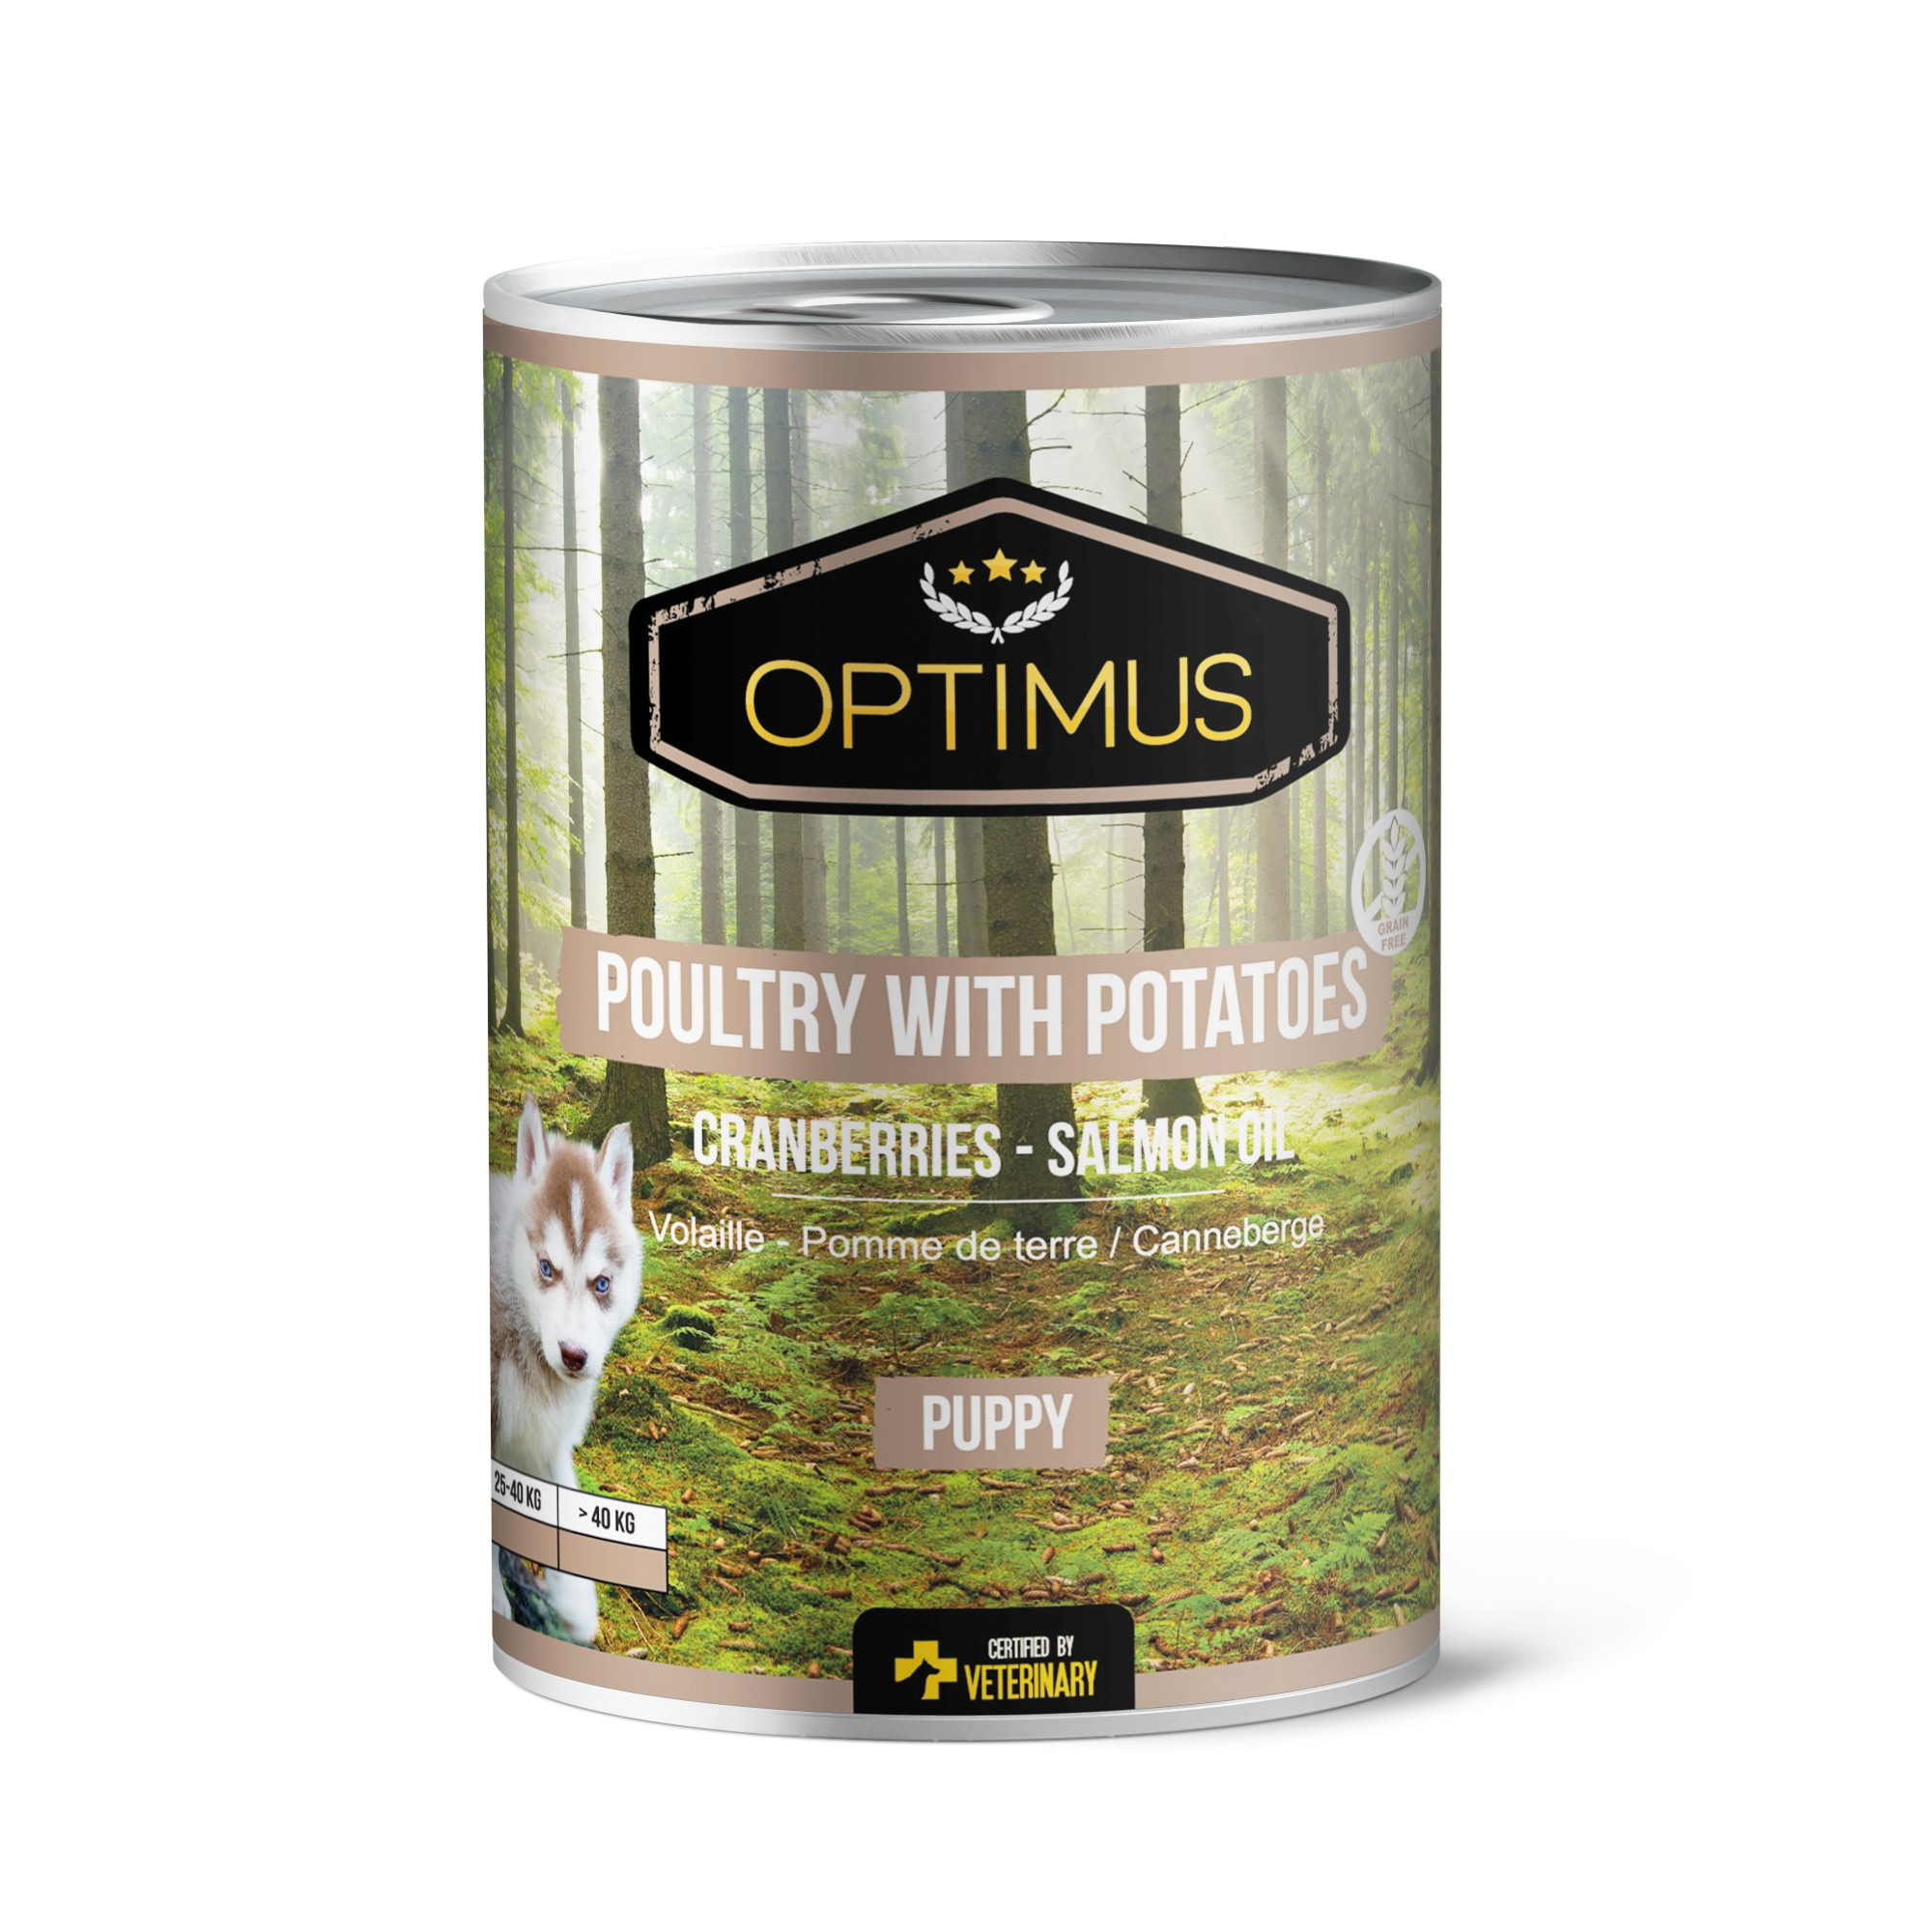 Natvoer Optimus Grain Free Puppy - Poultry with potatoes